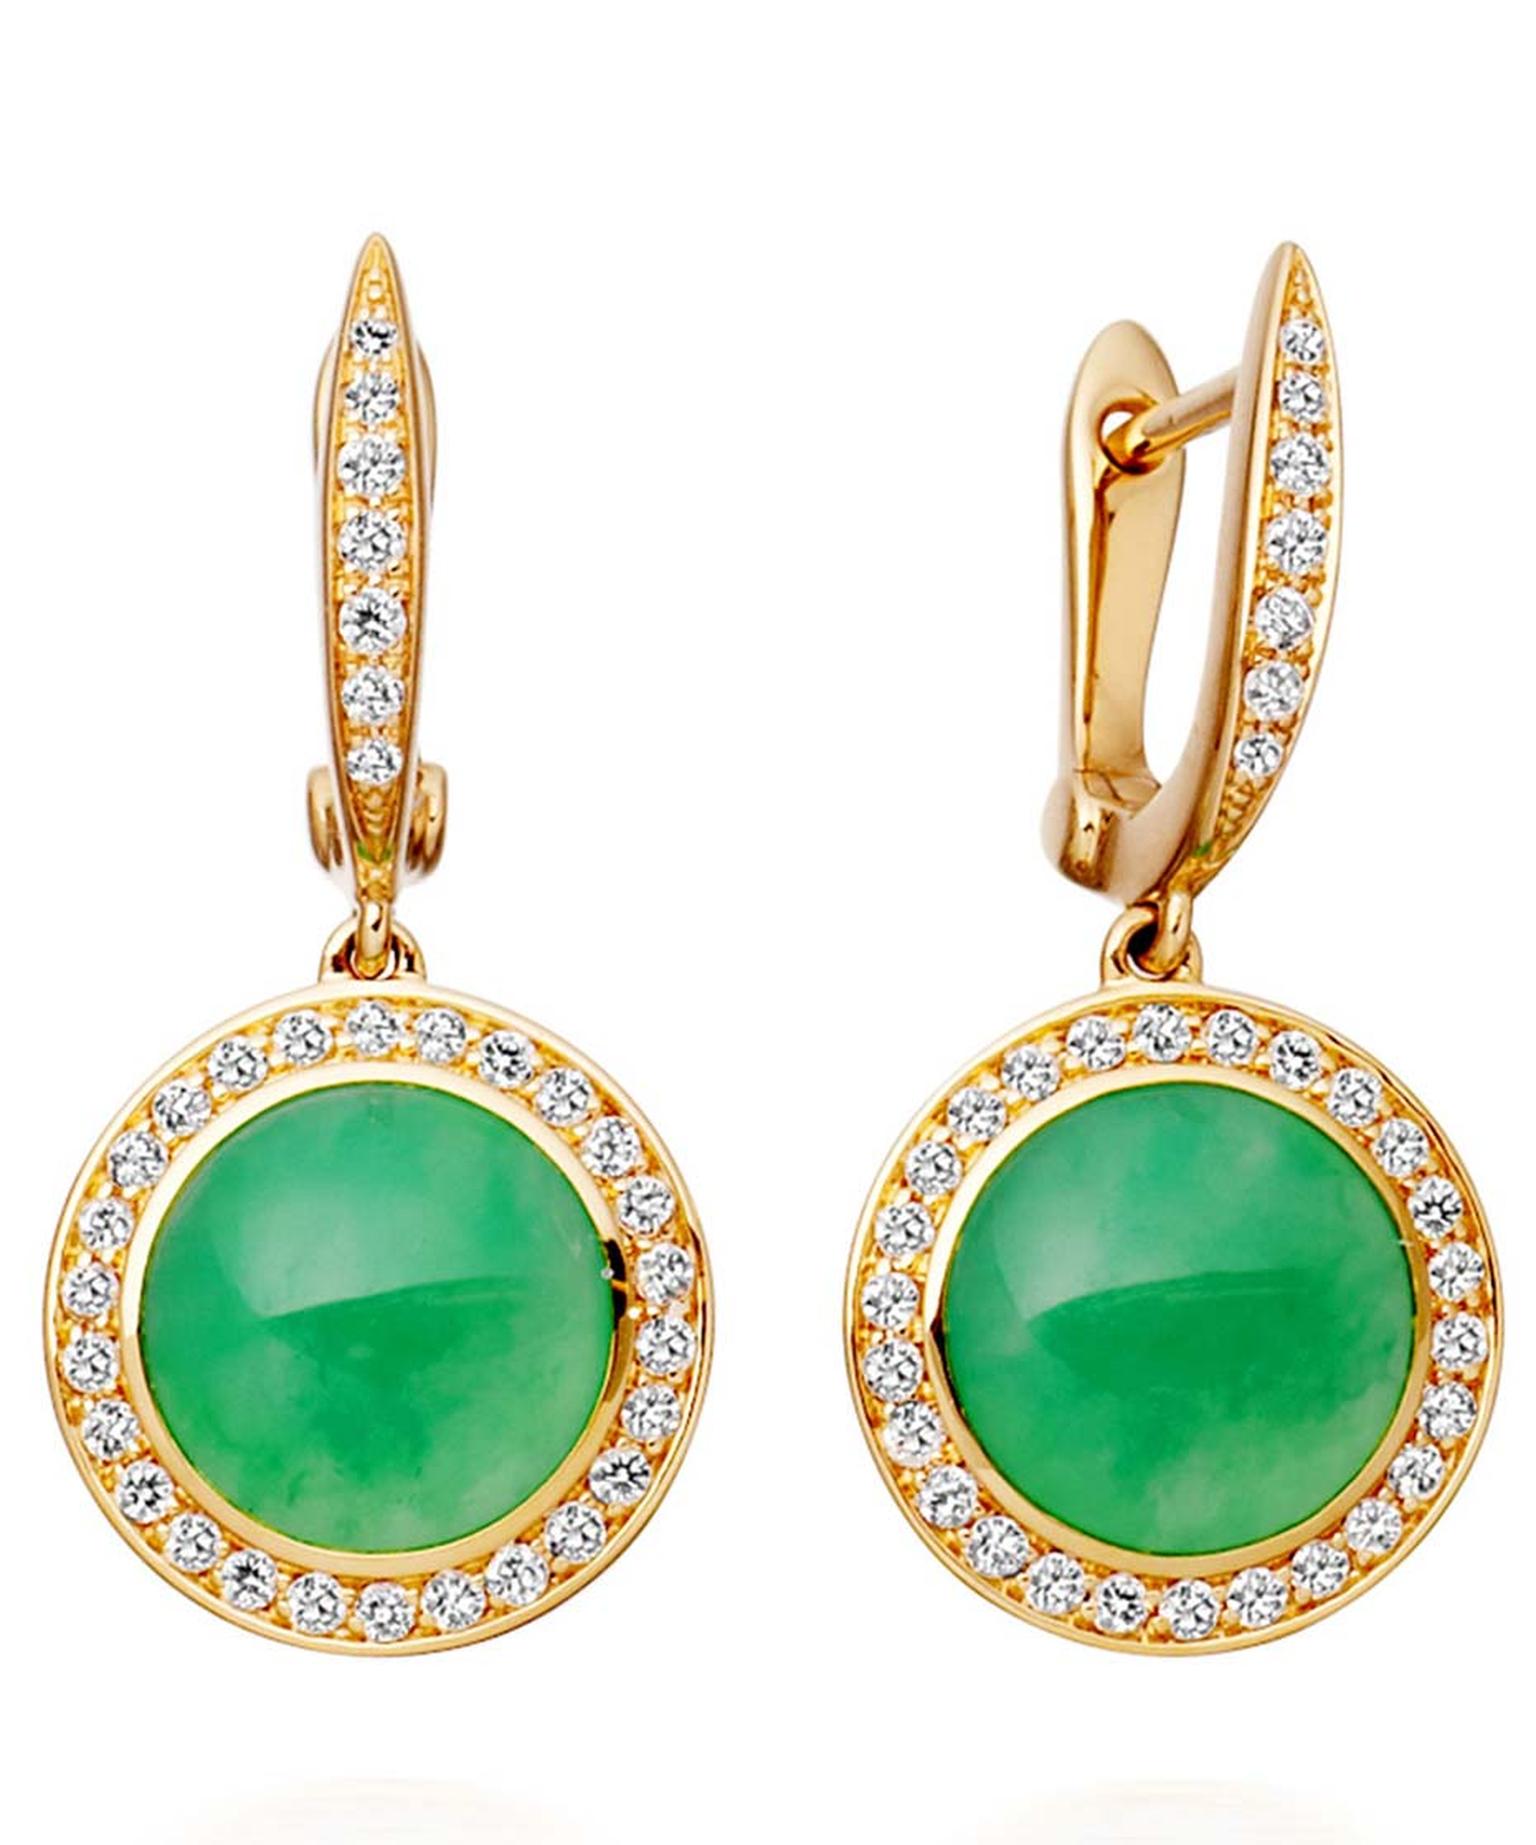 Astley Clarke Leah earrings in gold with chrysoprase and pavé diamonds (£3,750).